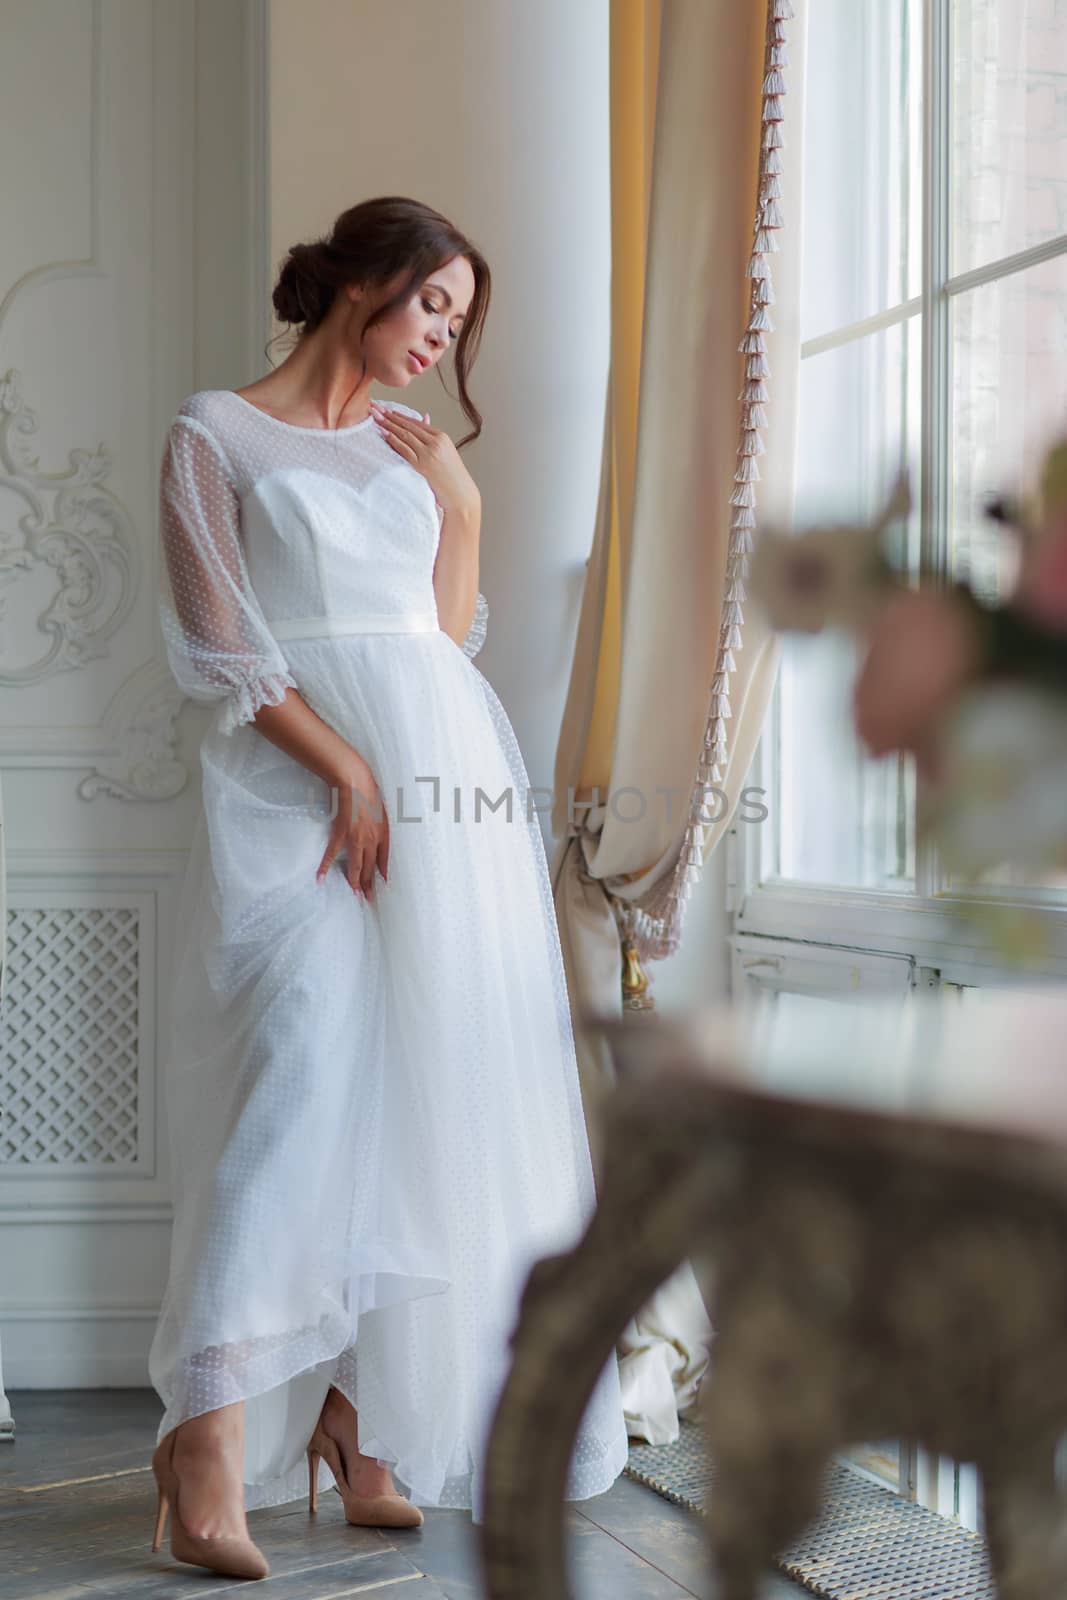 Full-length portrait of the bride in a white wedding dress by the window by galinasharapova